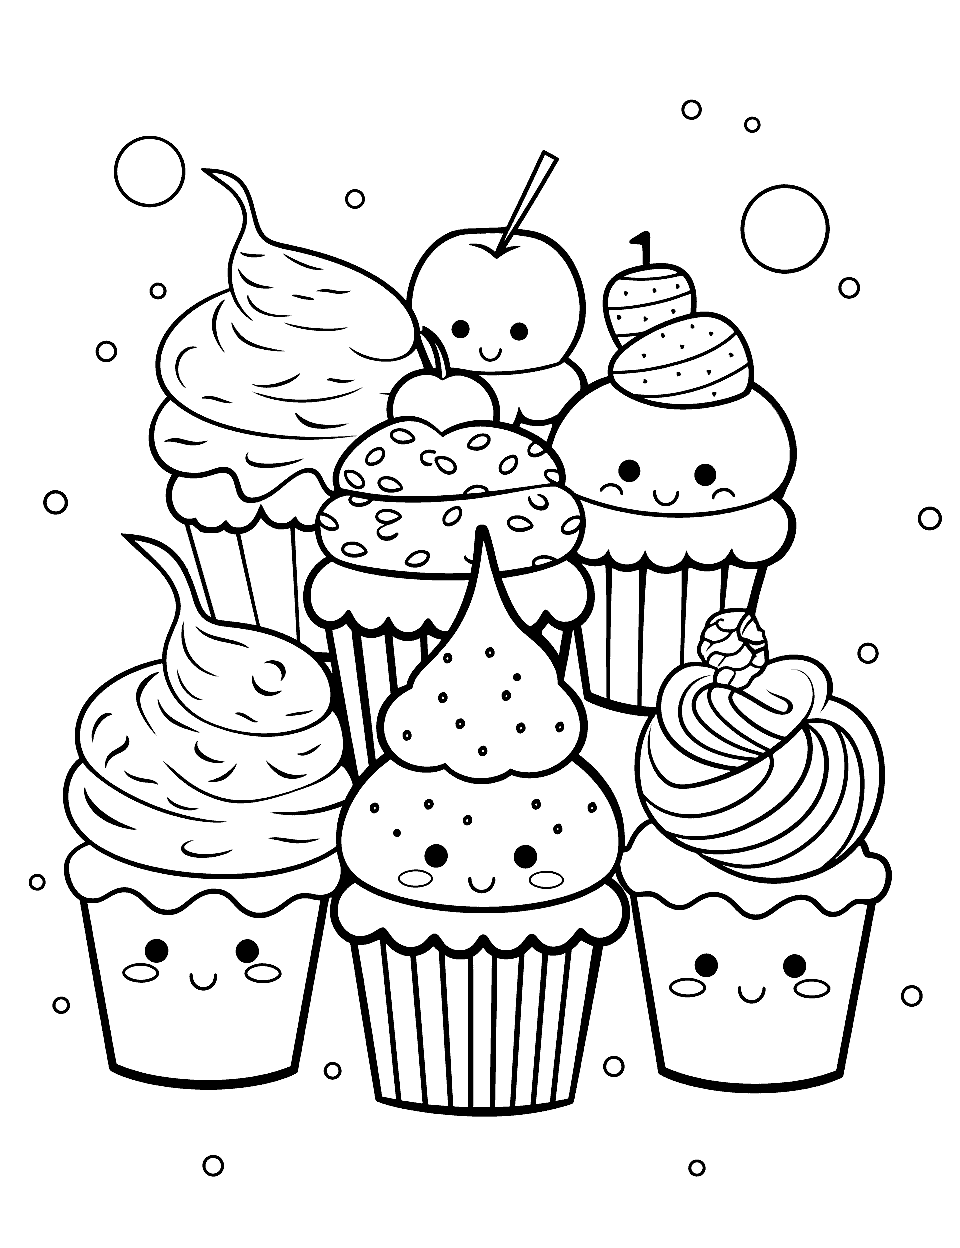 Kawaii Cupcakes Party Candy Coloring Page - Several adorable, kawaii-style cupcakes with cheerful faces.